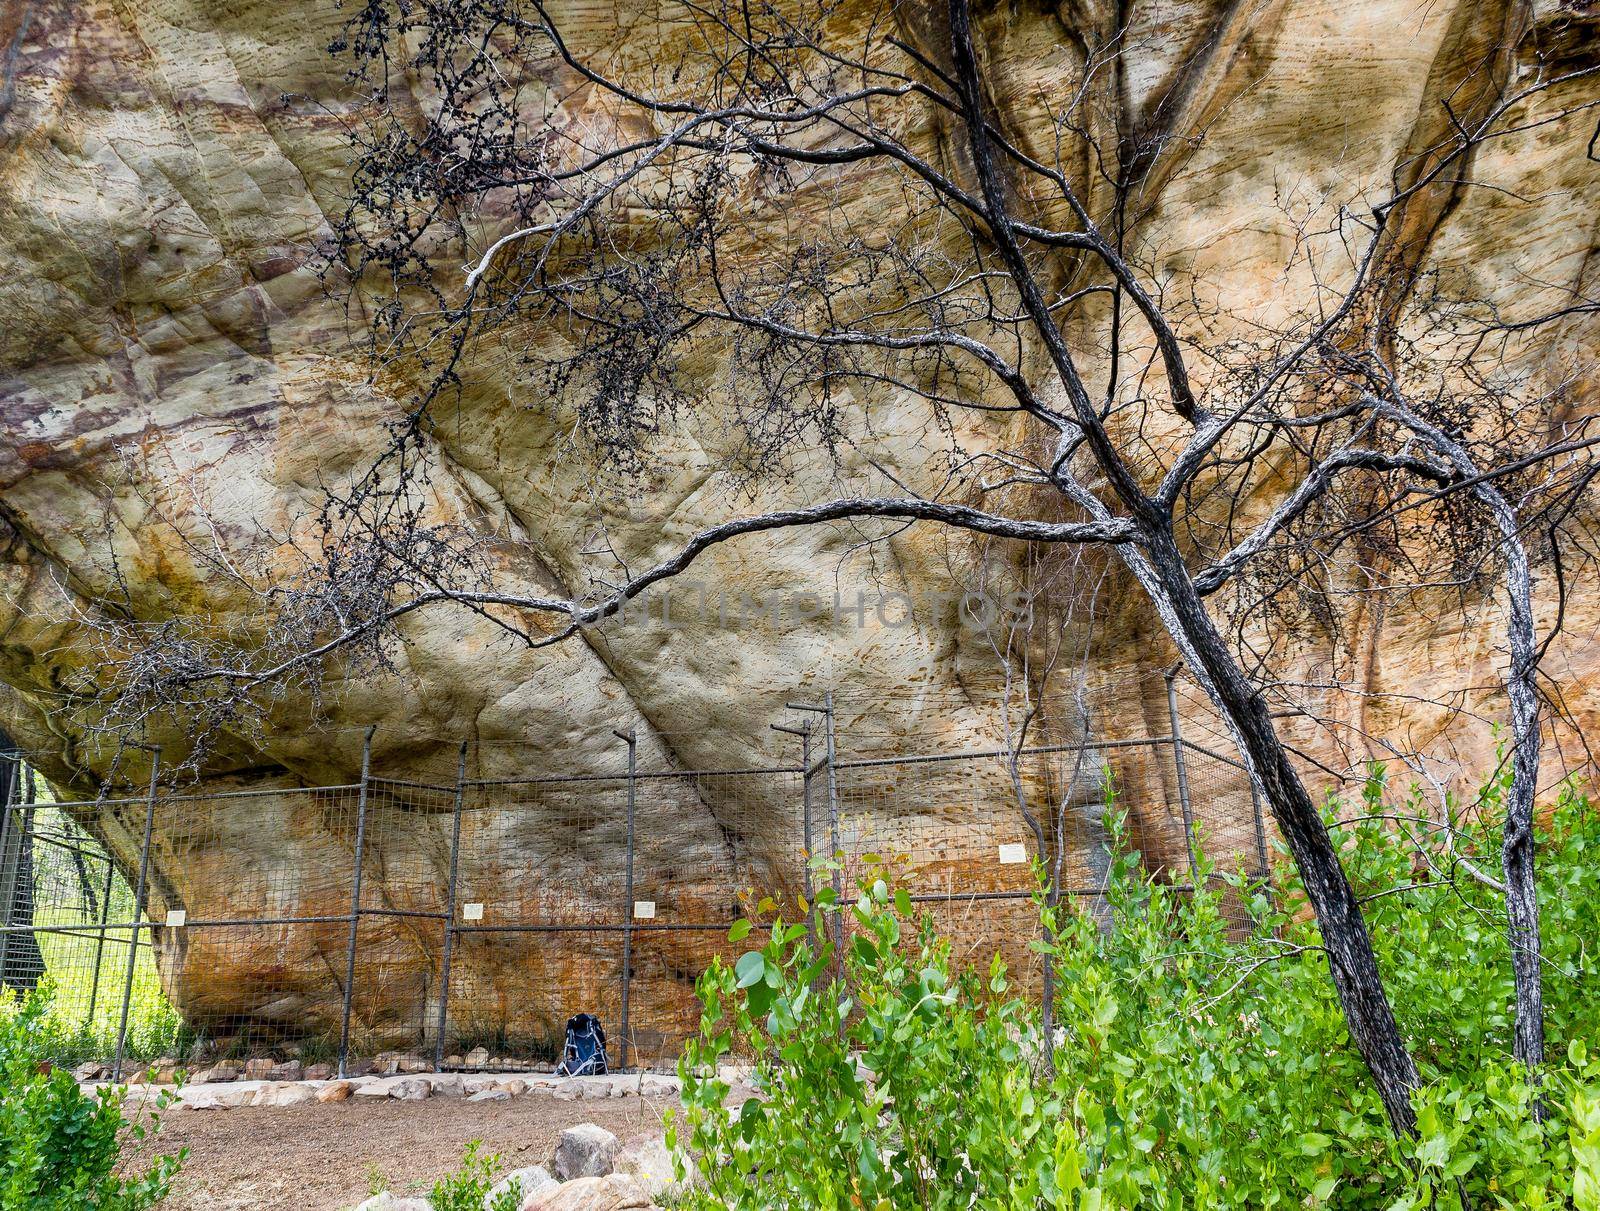 protected cave with a fence for Ancient Aboriginal Art: hand prints, animal herds, spiral, Grampians, australia by bettercallcurry